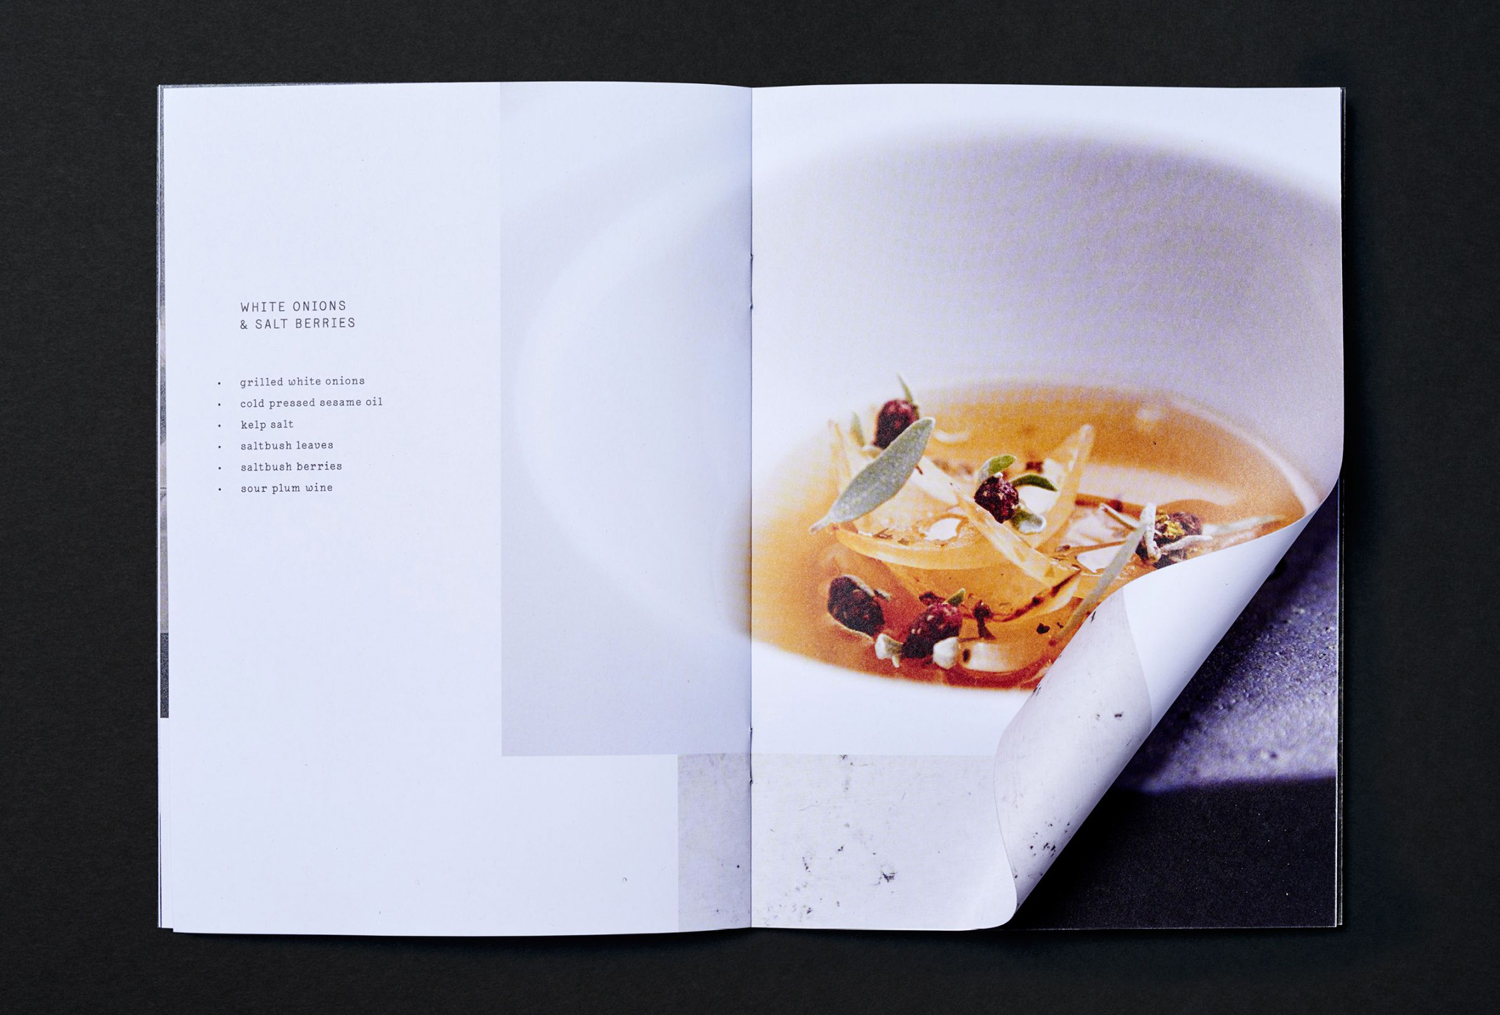 Menu and art direction by graphic design studio Swear Words for Melbourne restaurant Ides